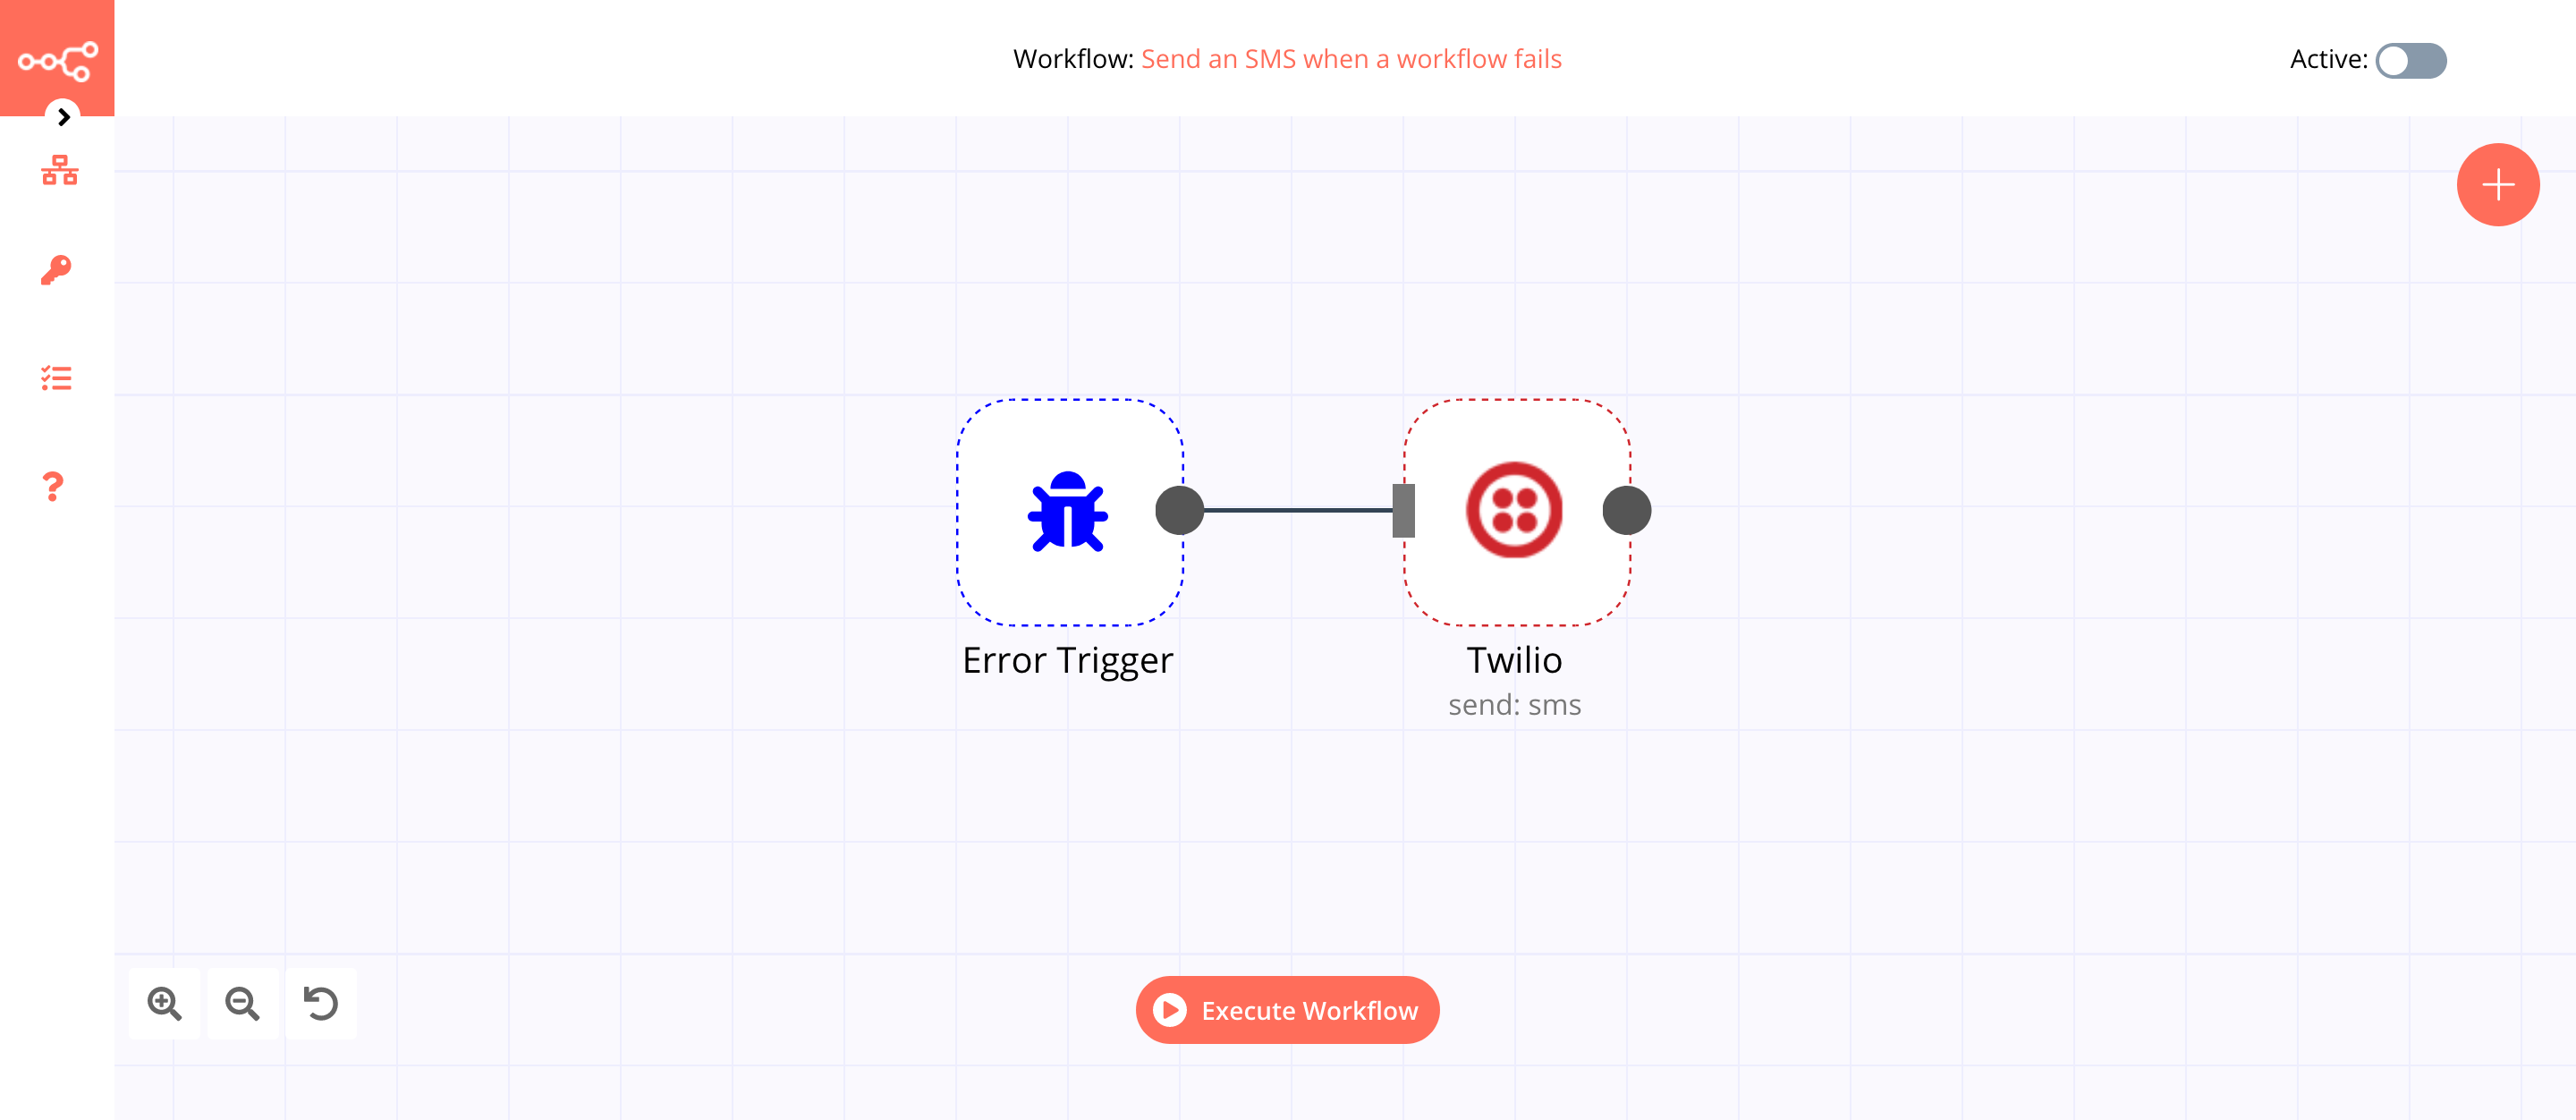 A workflow with the Error Trigger node